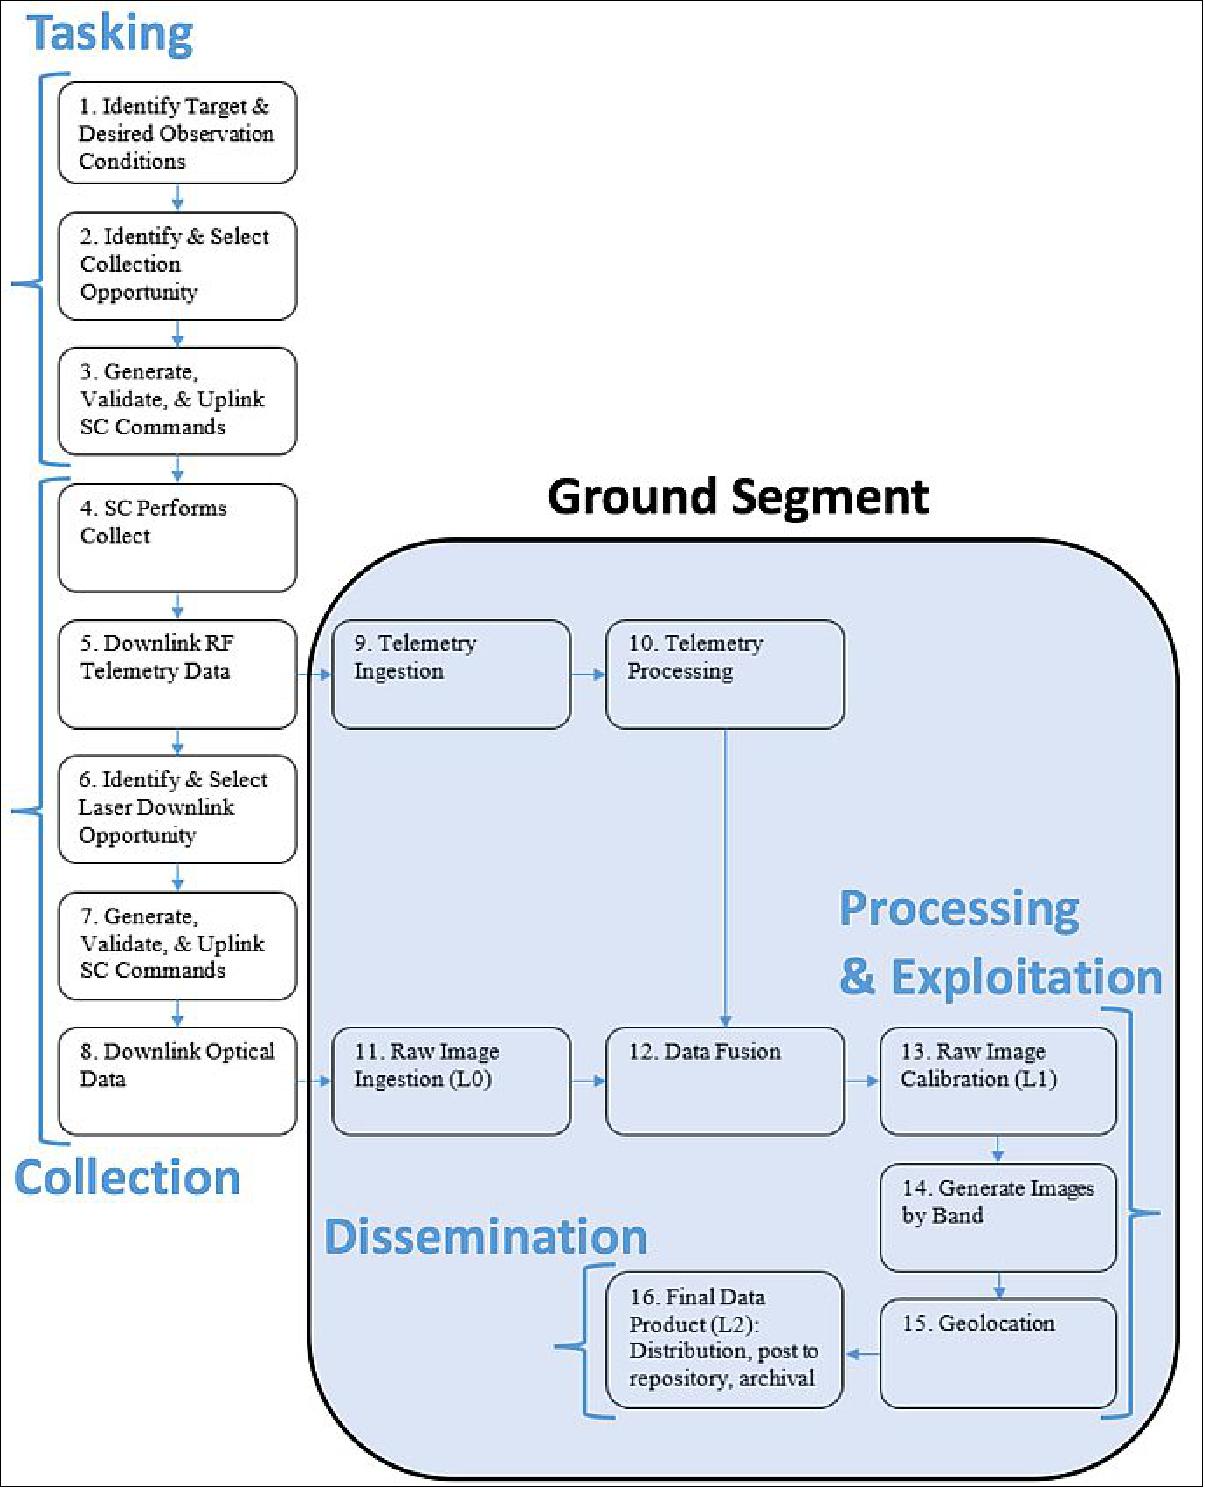 Figure 5: An outline of the R3 tasking, collection, processing, exploitation and dissemination (TCPED) process. The process runs through a number of steps starting with tasking (image credit: Aerospace)